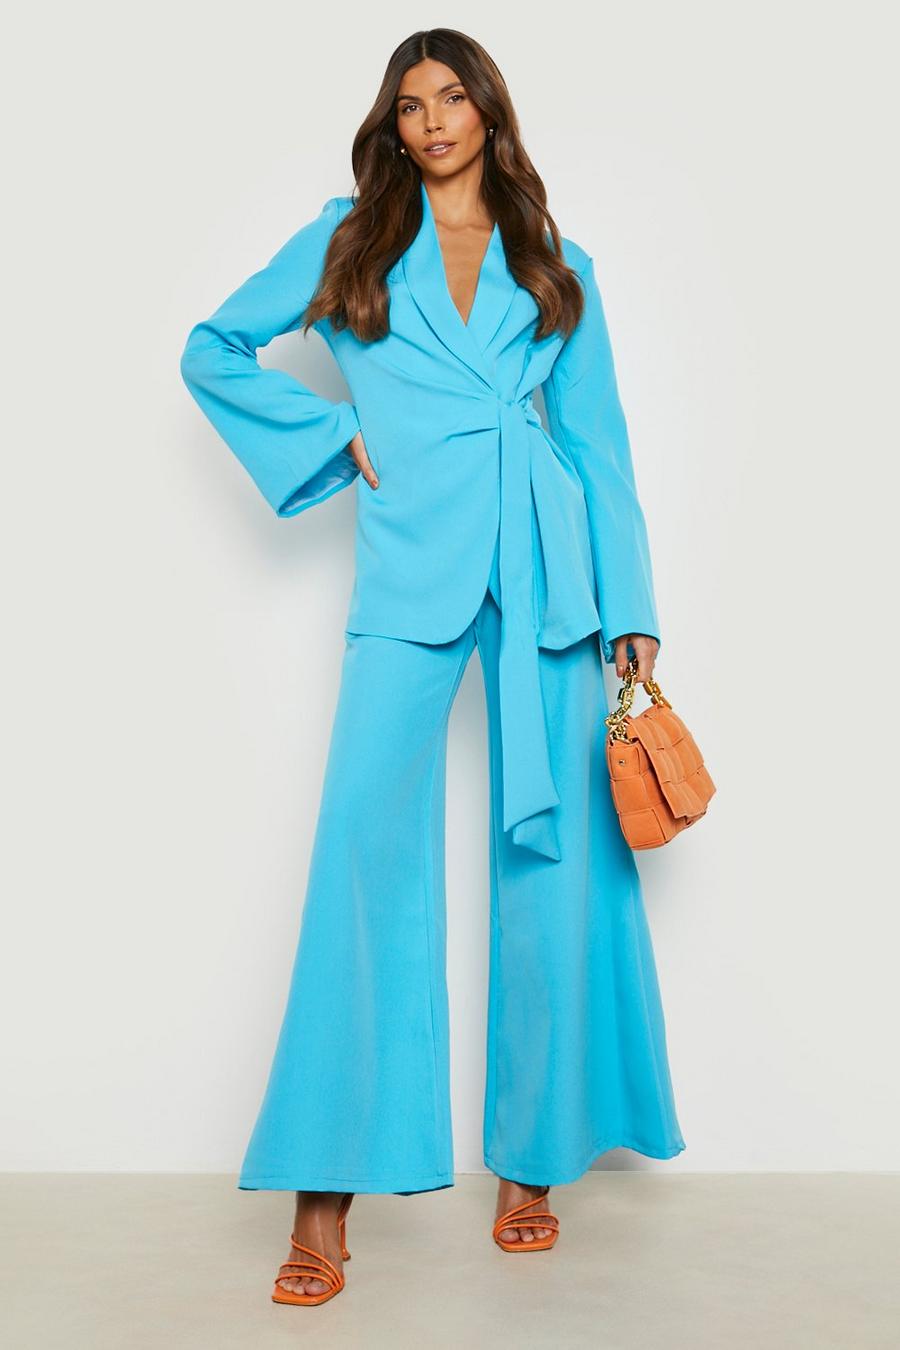 Pant Suits for Wedding Guests  Dressy Pant Suits for Wedding